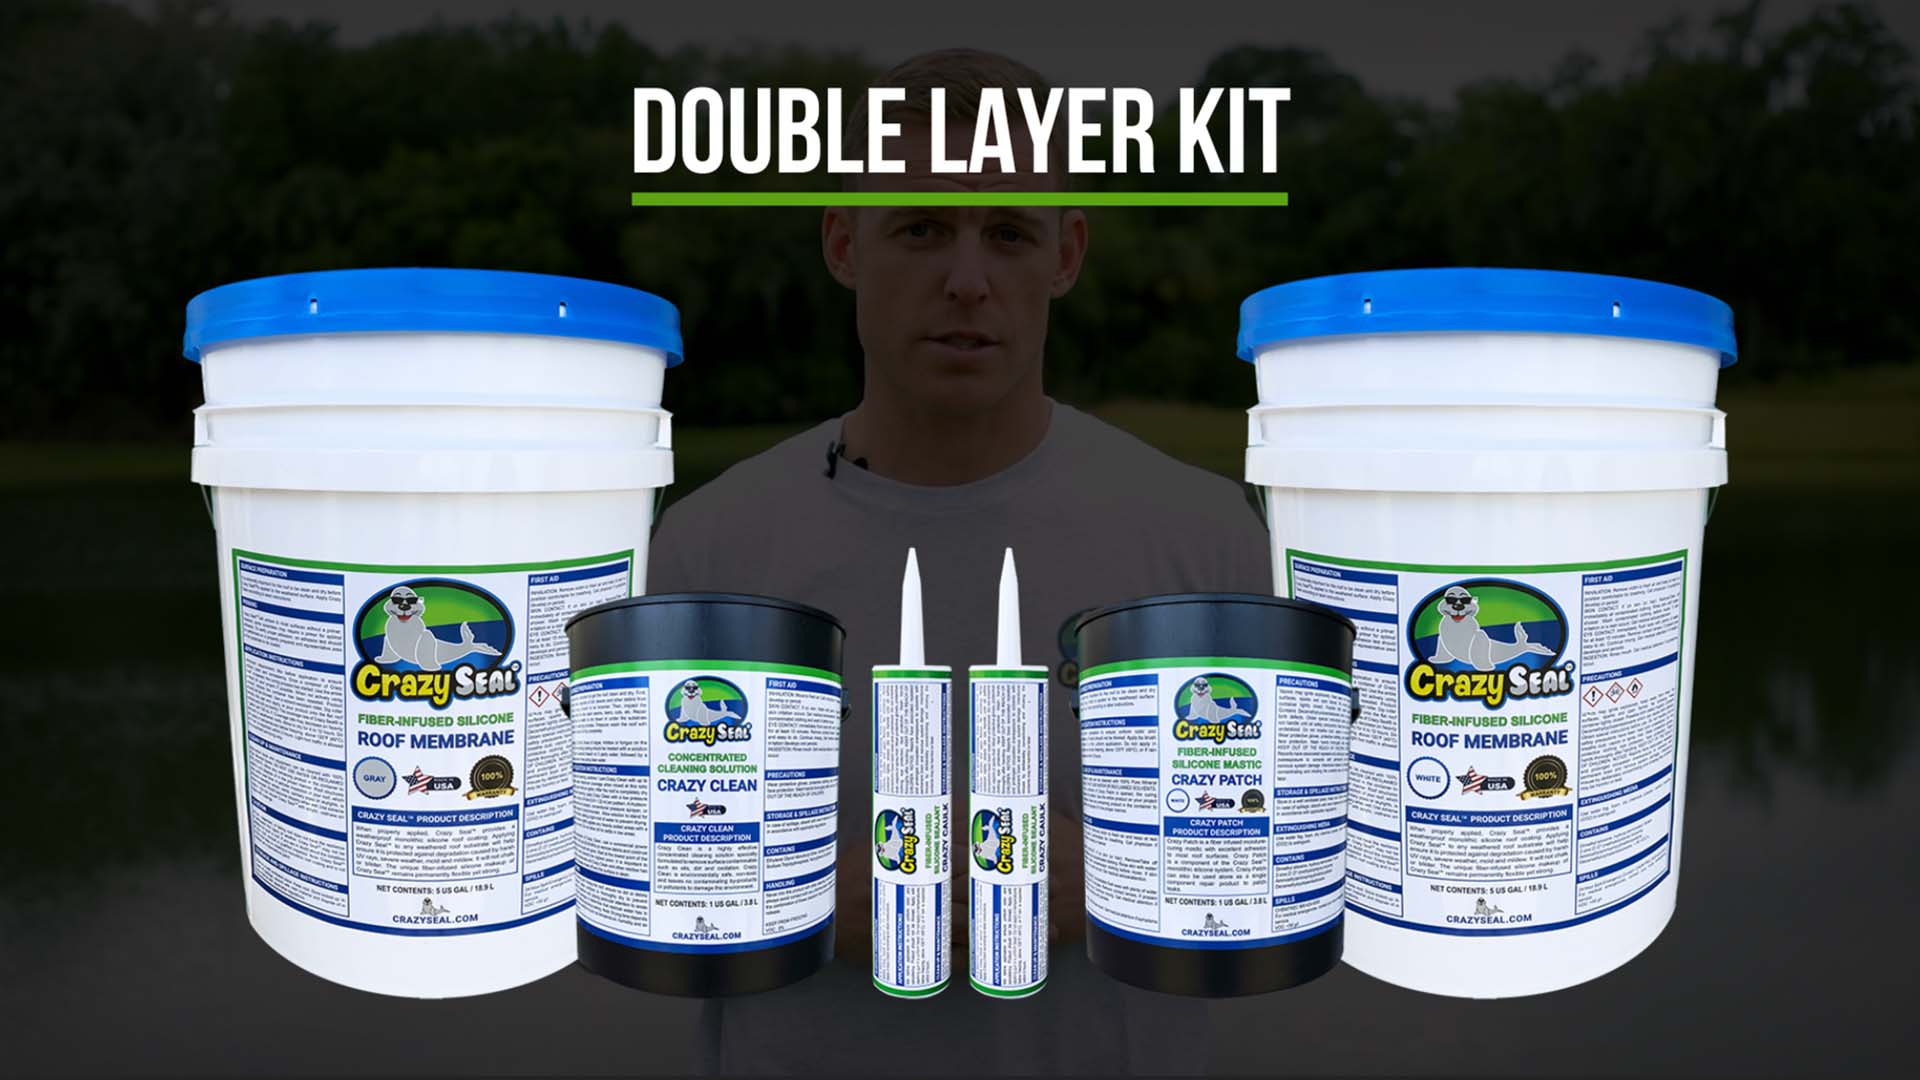 DOUBLE LAYER KIT